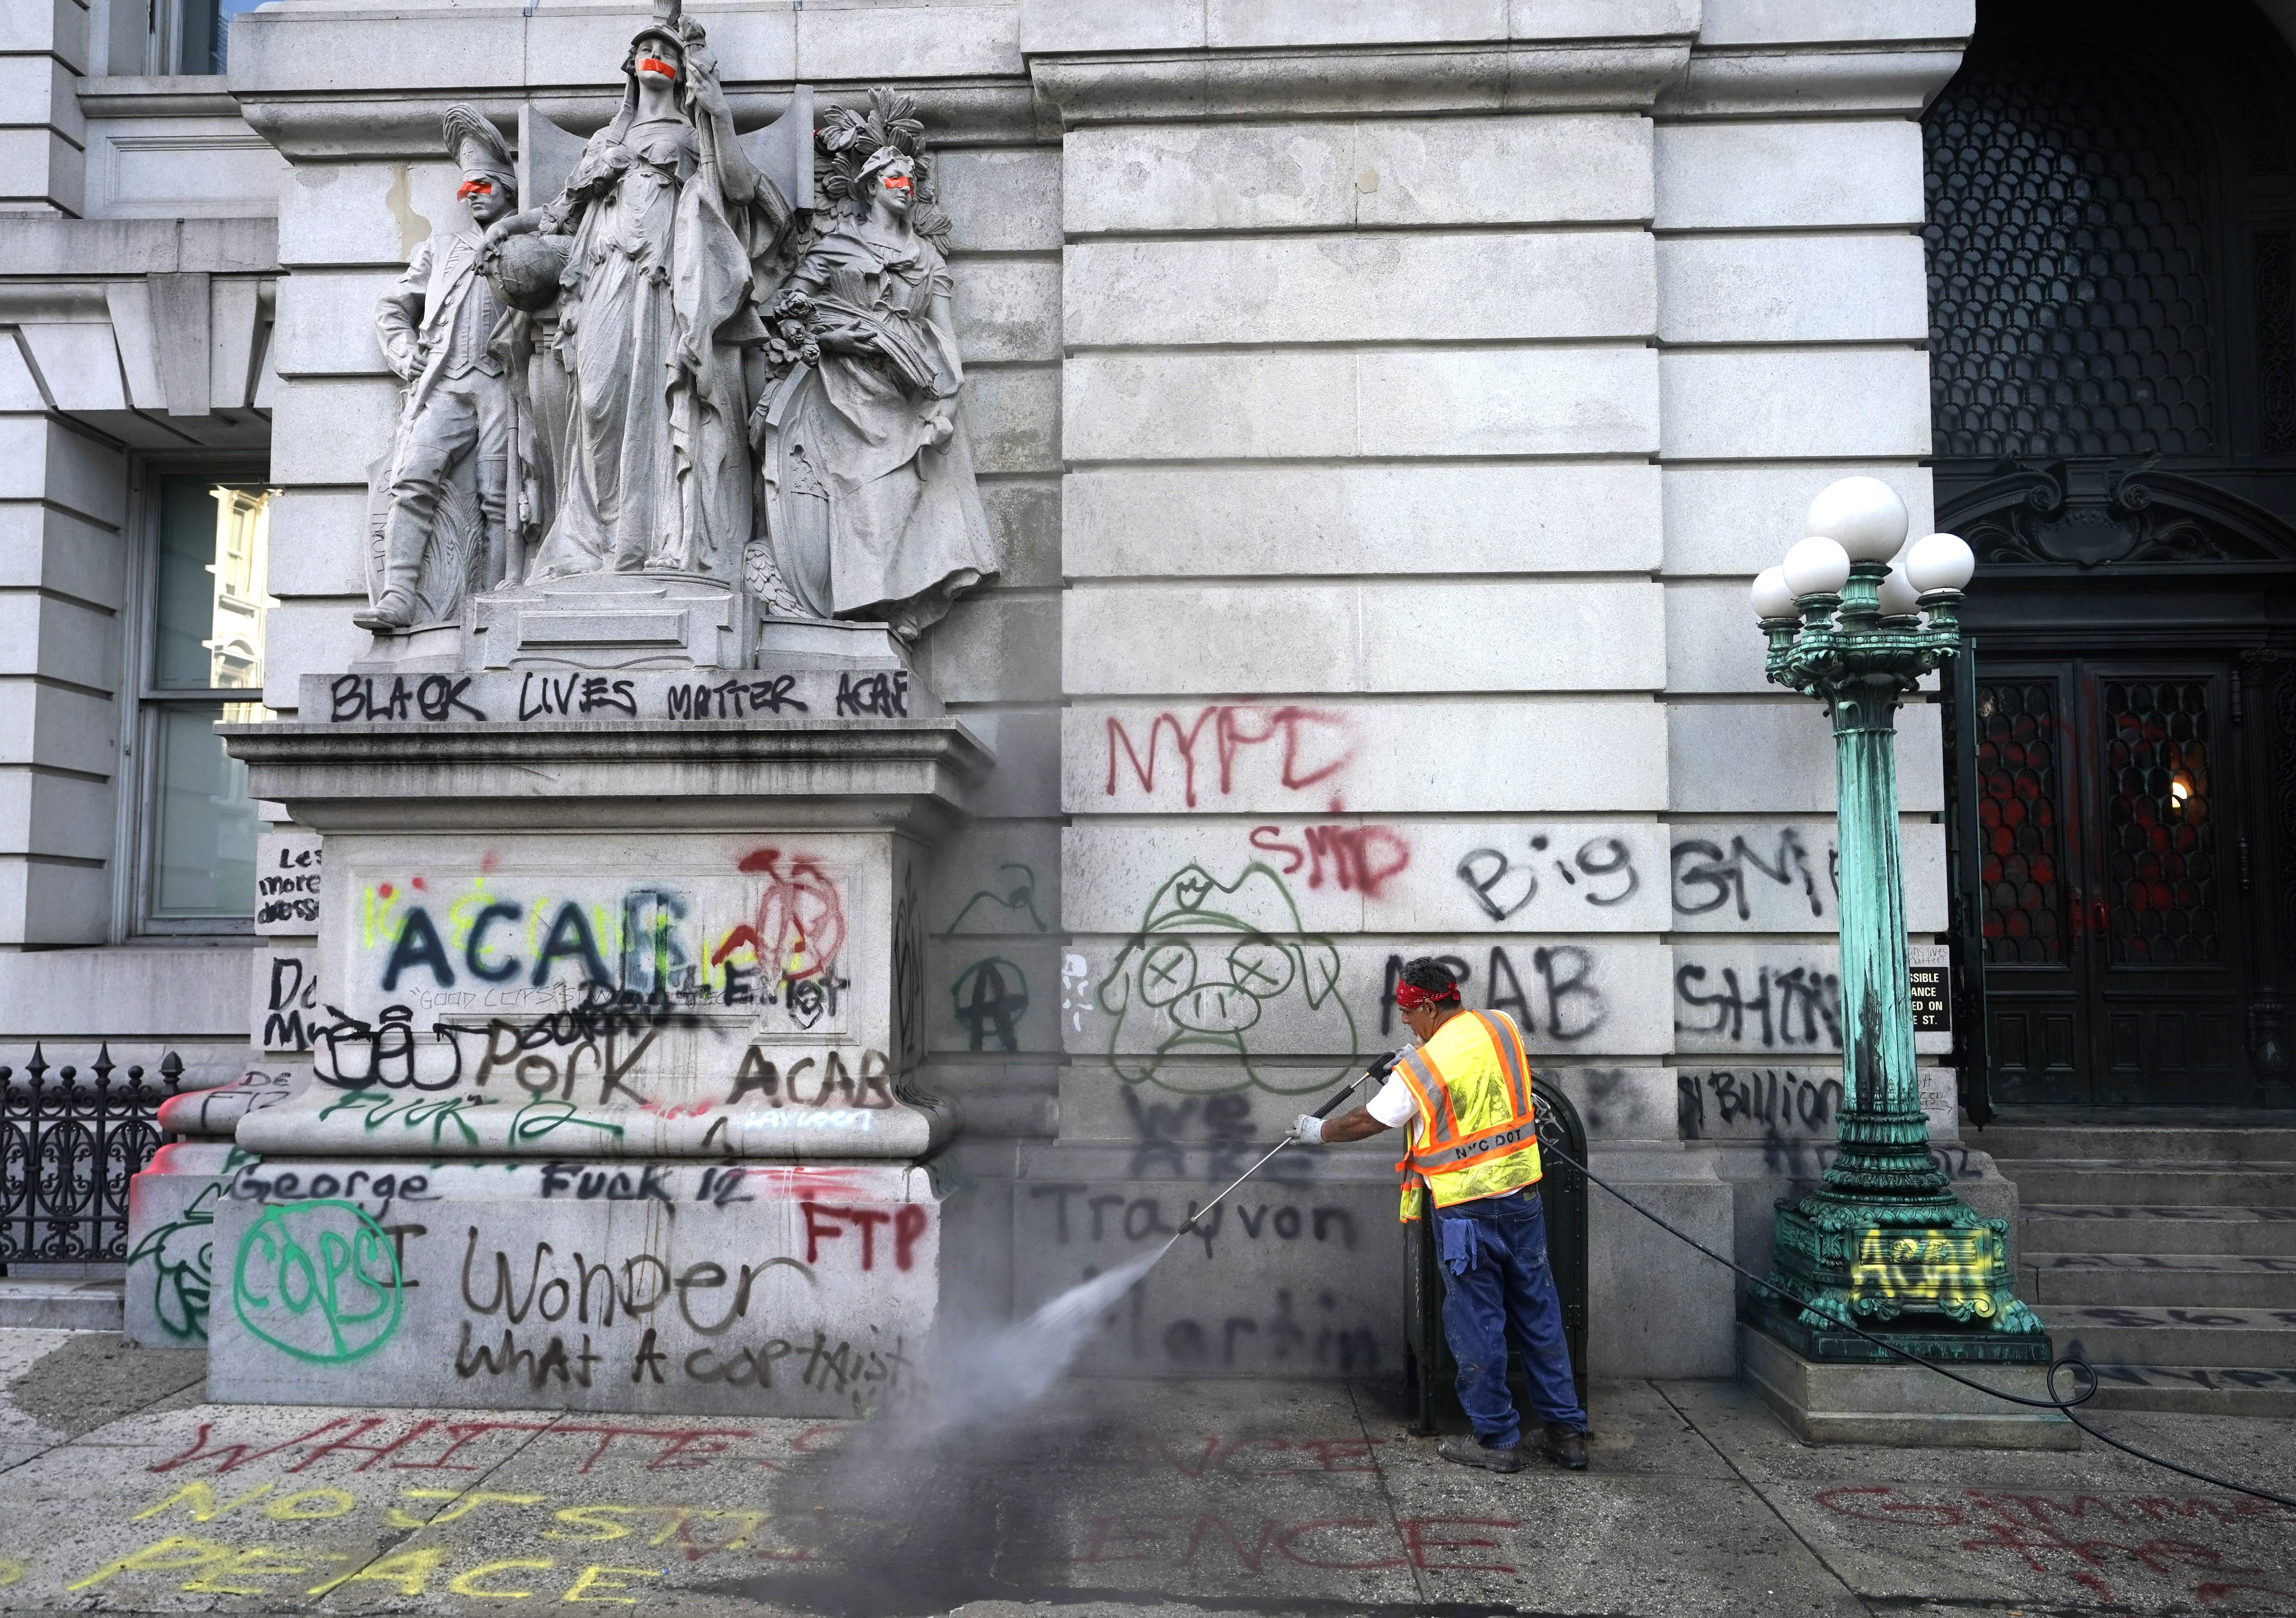 Sanitation workers clean up graffiti on July 22, 2020, after the Occupy City Hall protesters were cleared overnight by police - New York police removed the remaining Occupy City Hall protesters out of a month-long encampment. The protesters demanded a cut of at least $1 billion from the NYPD budget. The City Council approved the reform and Mayor Bill de Blasio signed into law. (Photo by TIMOTHY A. CLARY / AFP) (Photo by TIMOTHY A. CLARY/AFP via Getty Images)